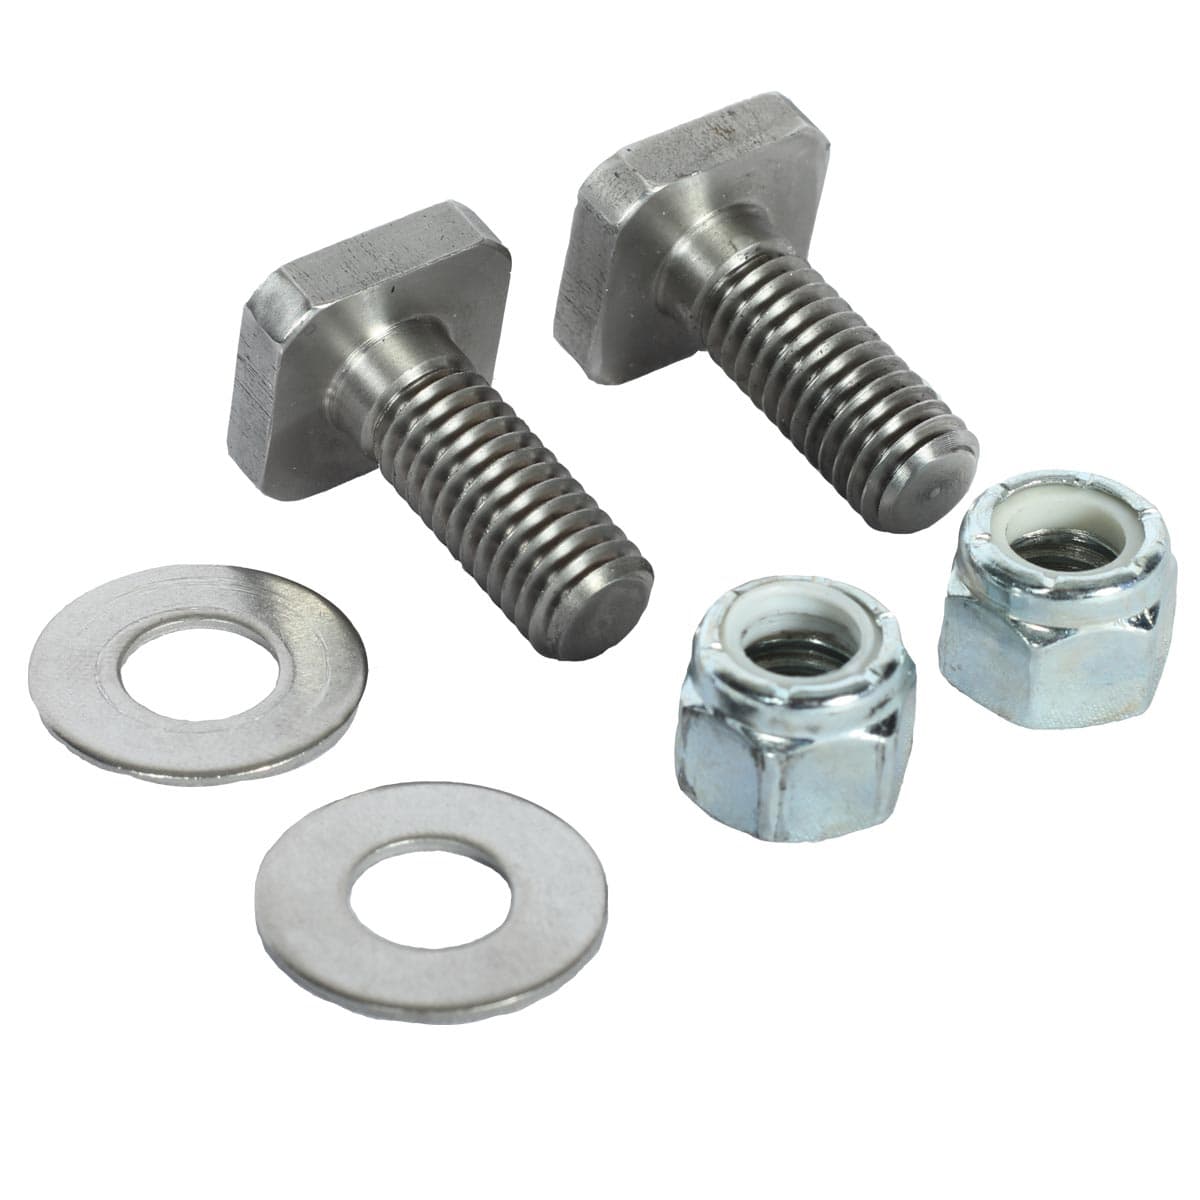 Two washers, nuts, and bolts